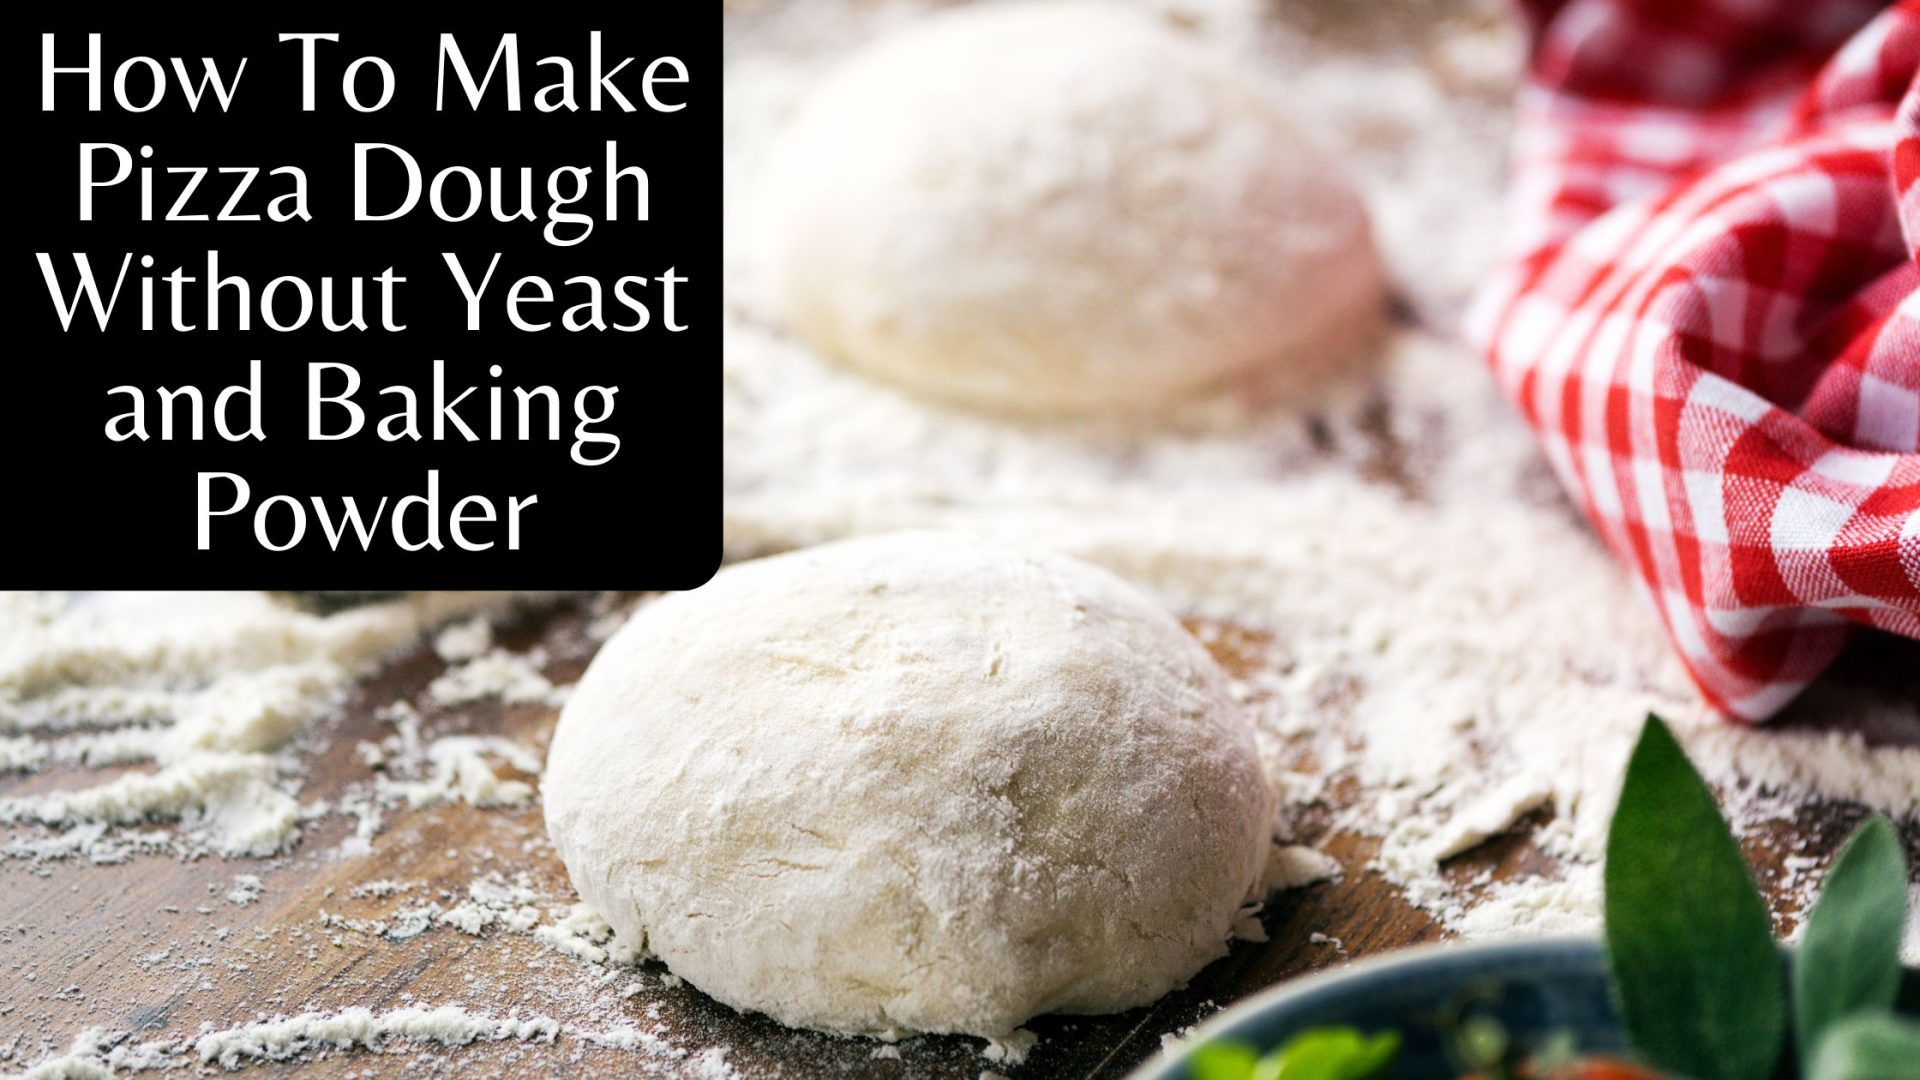 Pizza dough without yeast or baking powder – Make Delicious Homemade Pizza in 2023